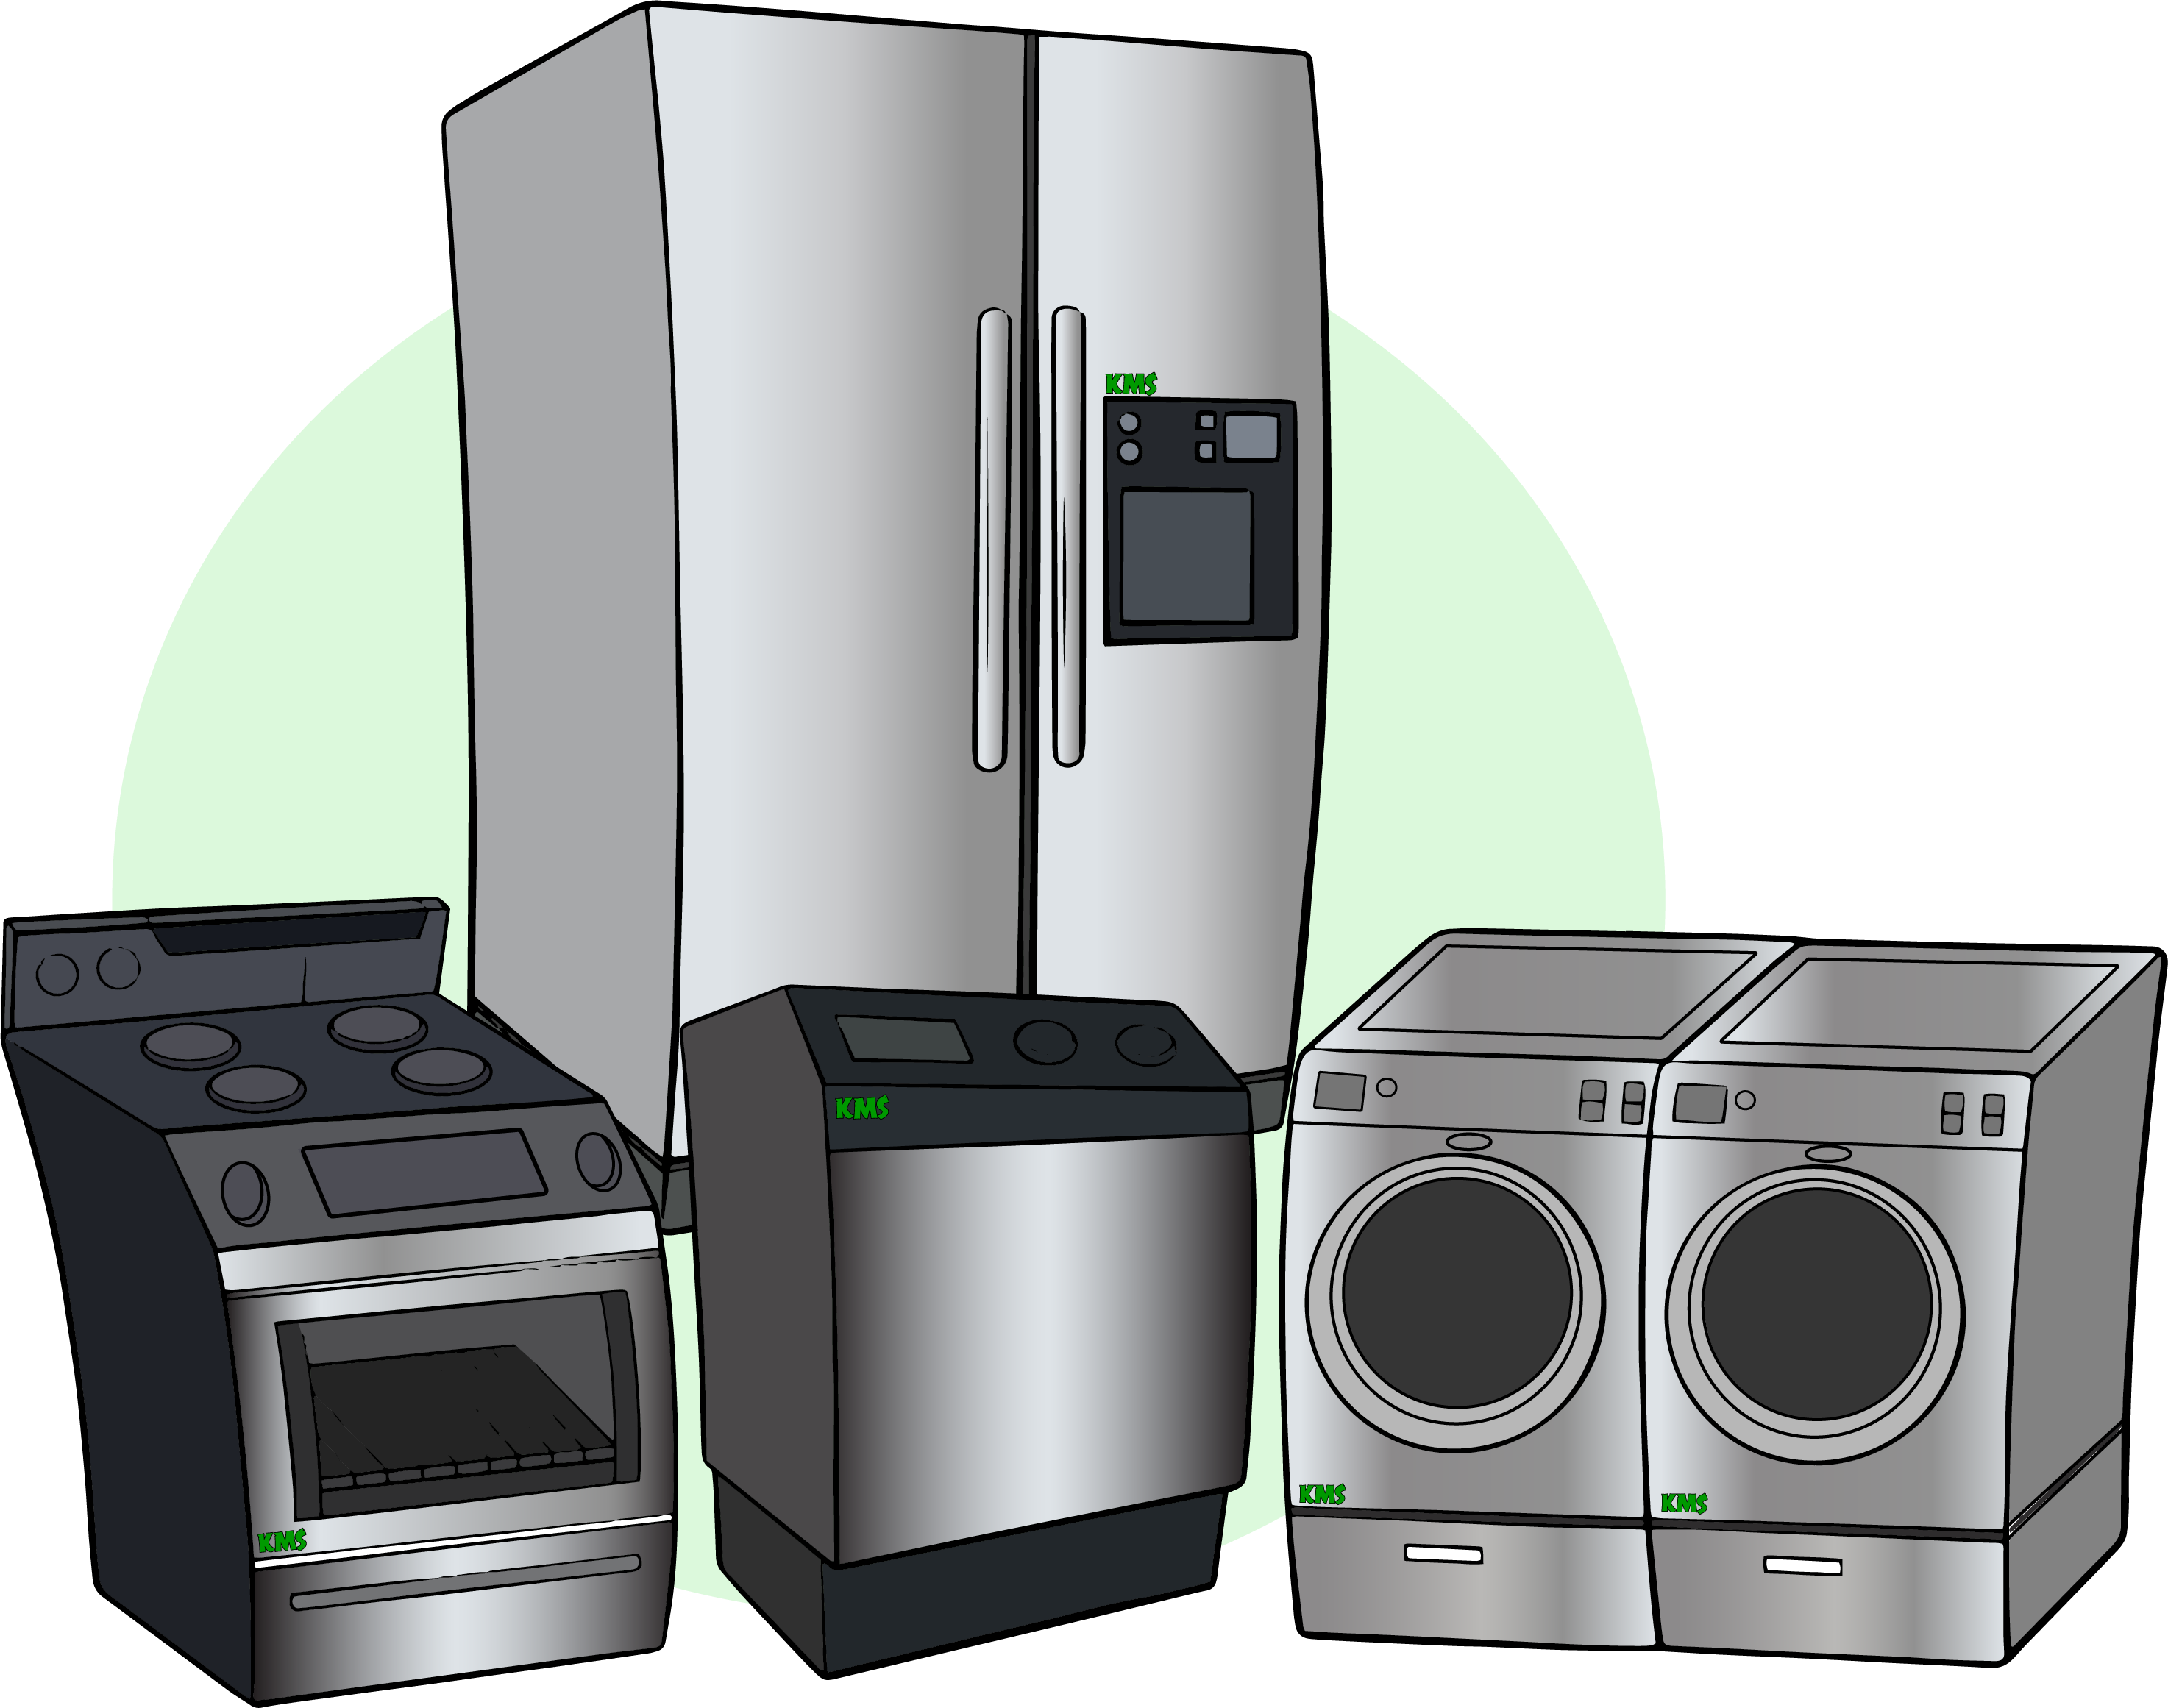 Whirlpool appliance repair service in montreal